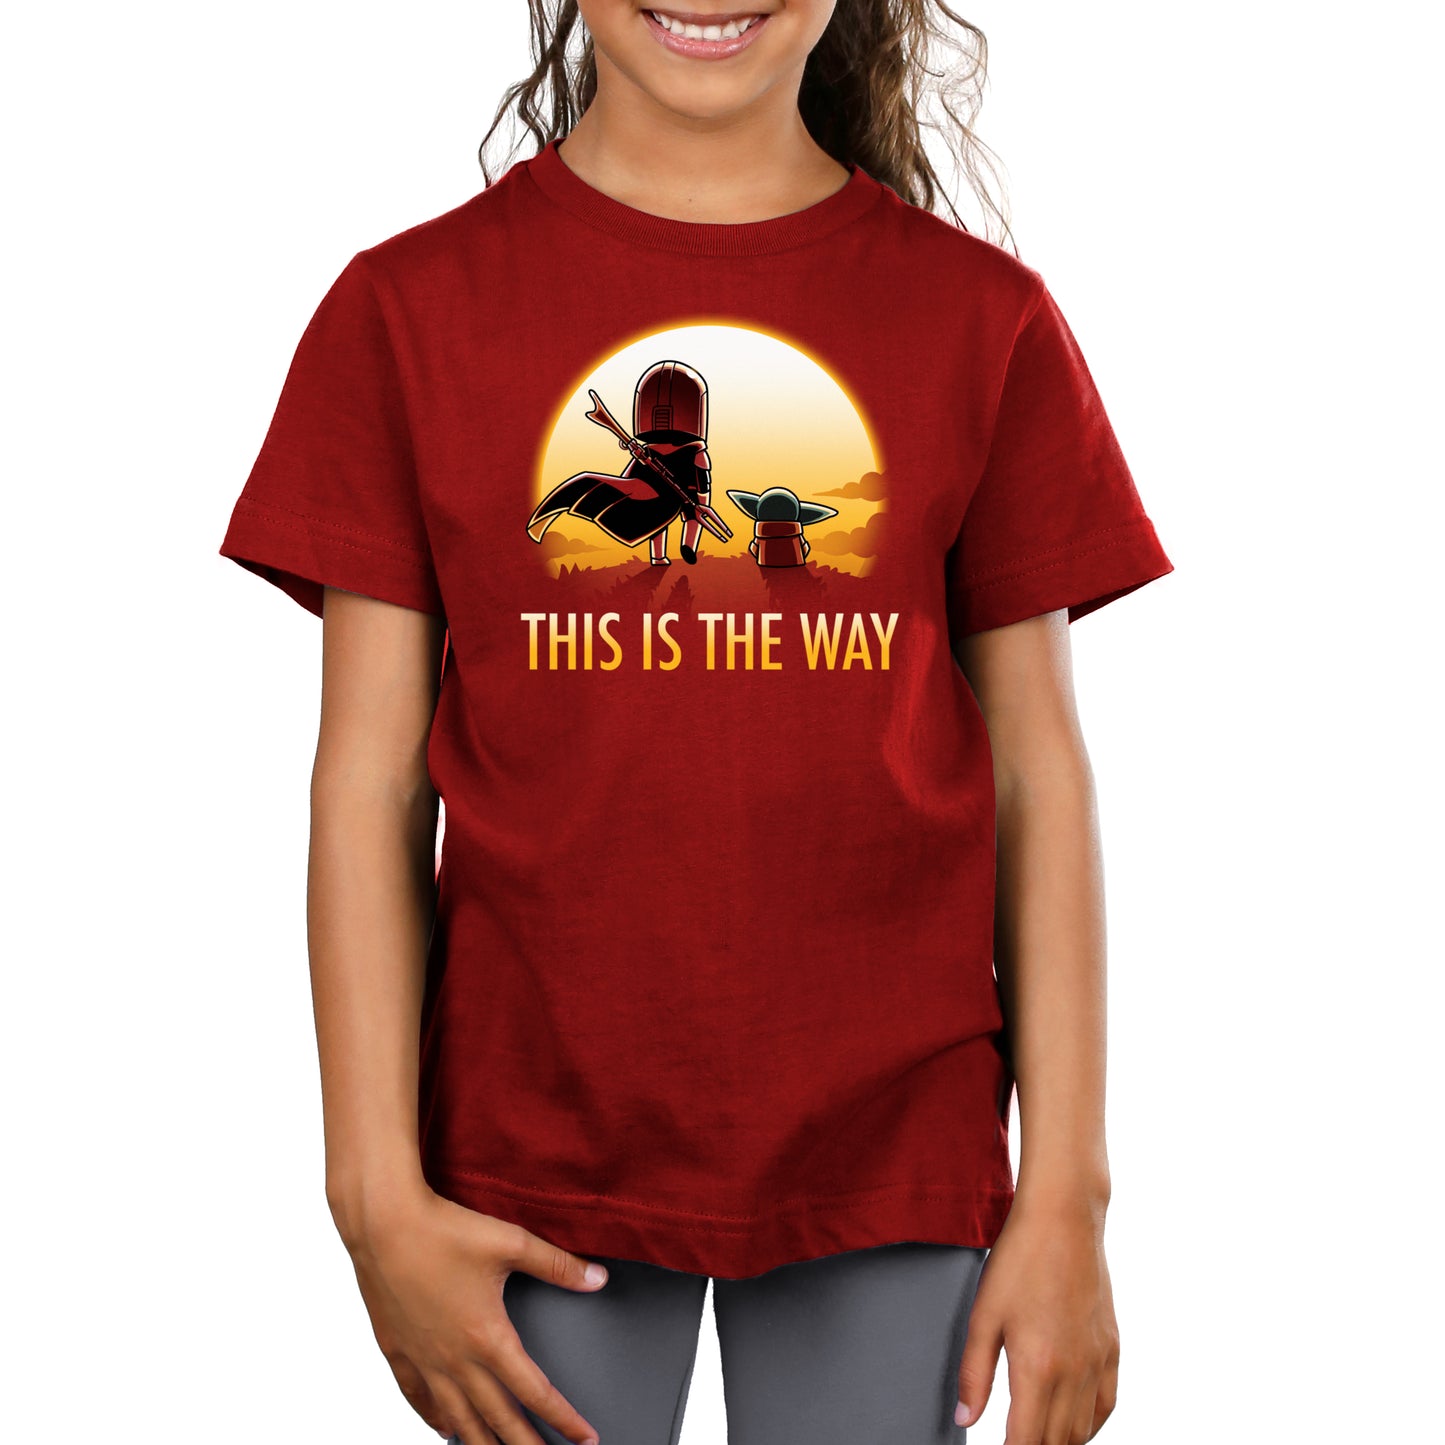 A girl wearing an officially licensed Star Wars Mandalorian-themed t-shirt, named "This is the Way (Sunset)".